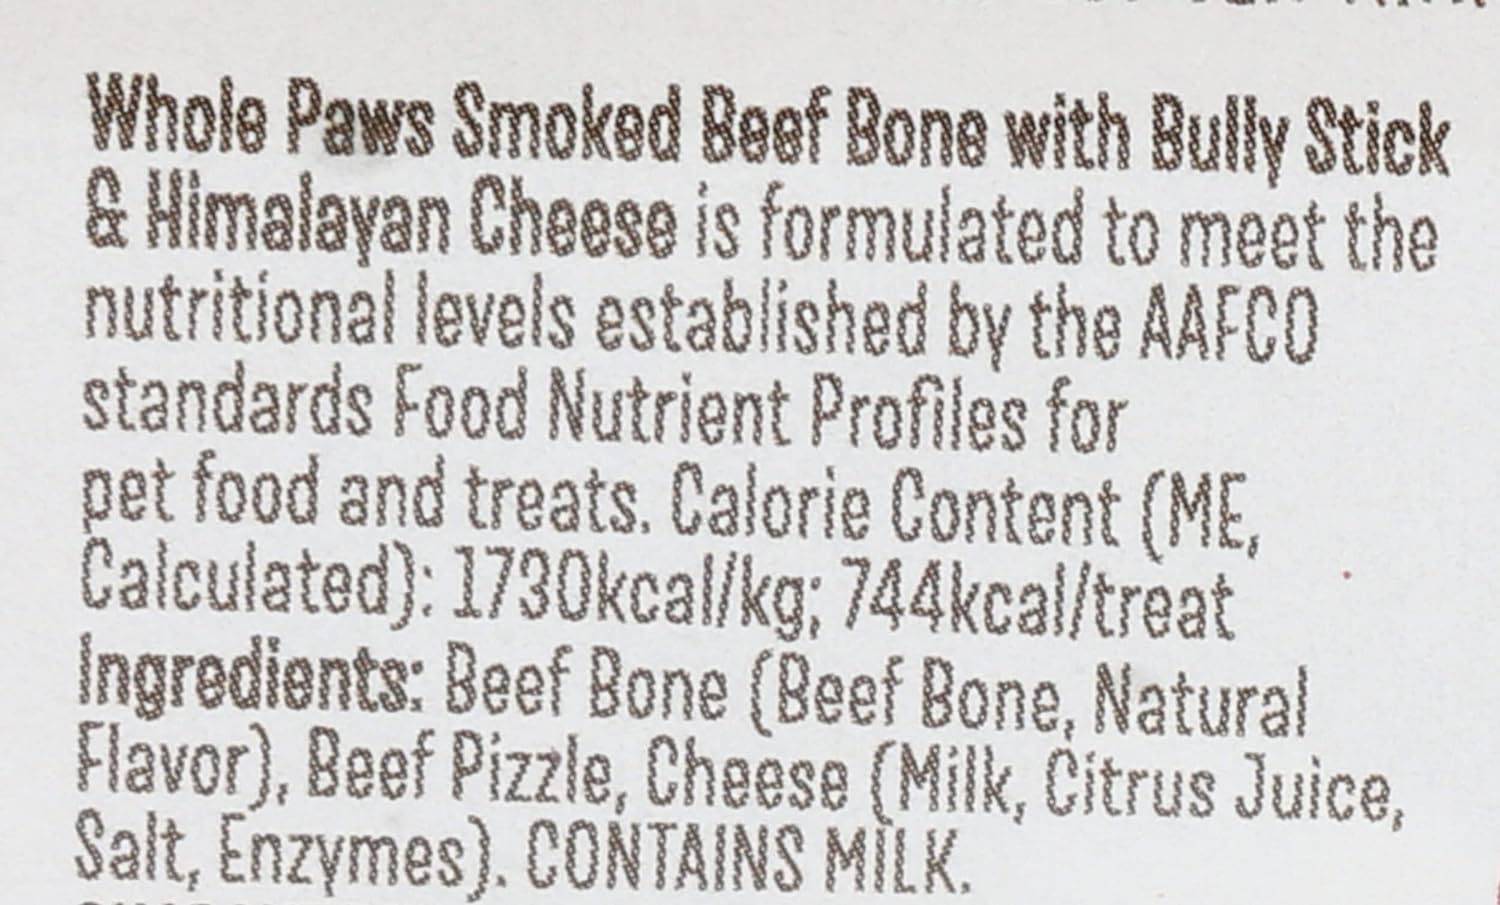 Whole Paws, Whole Paws, Smoked Bully Bone Large, 1 Count : P